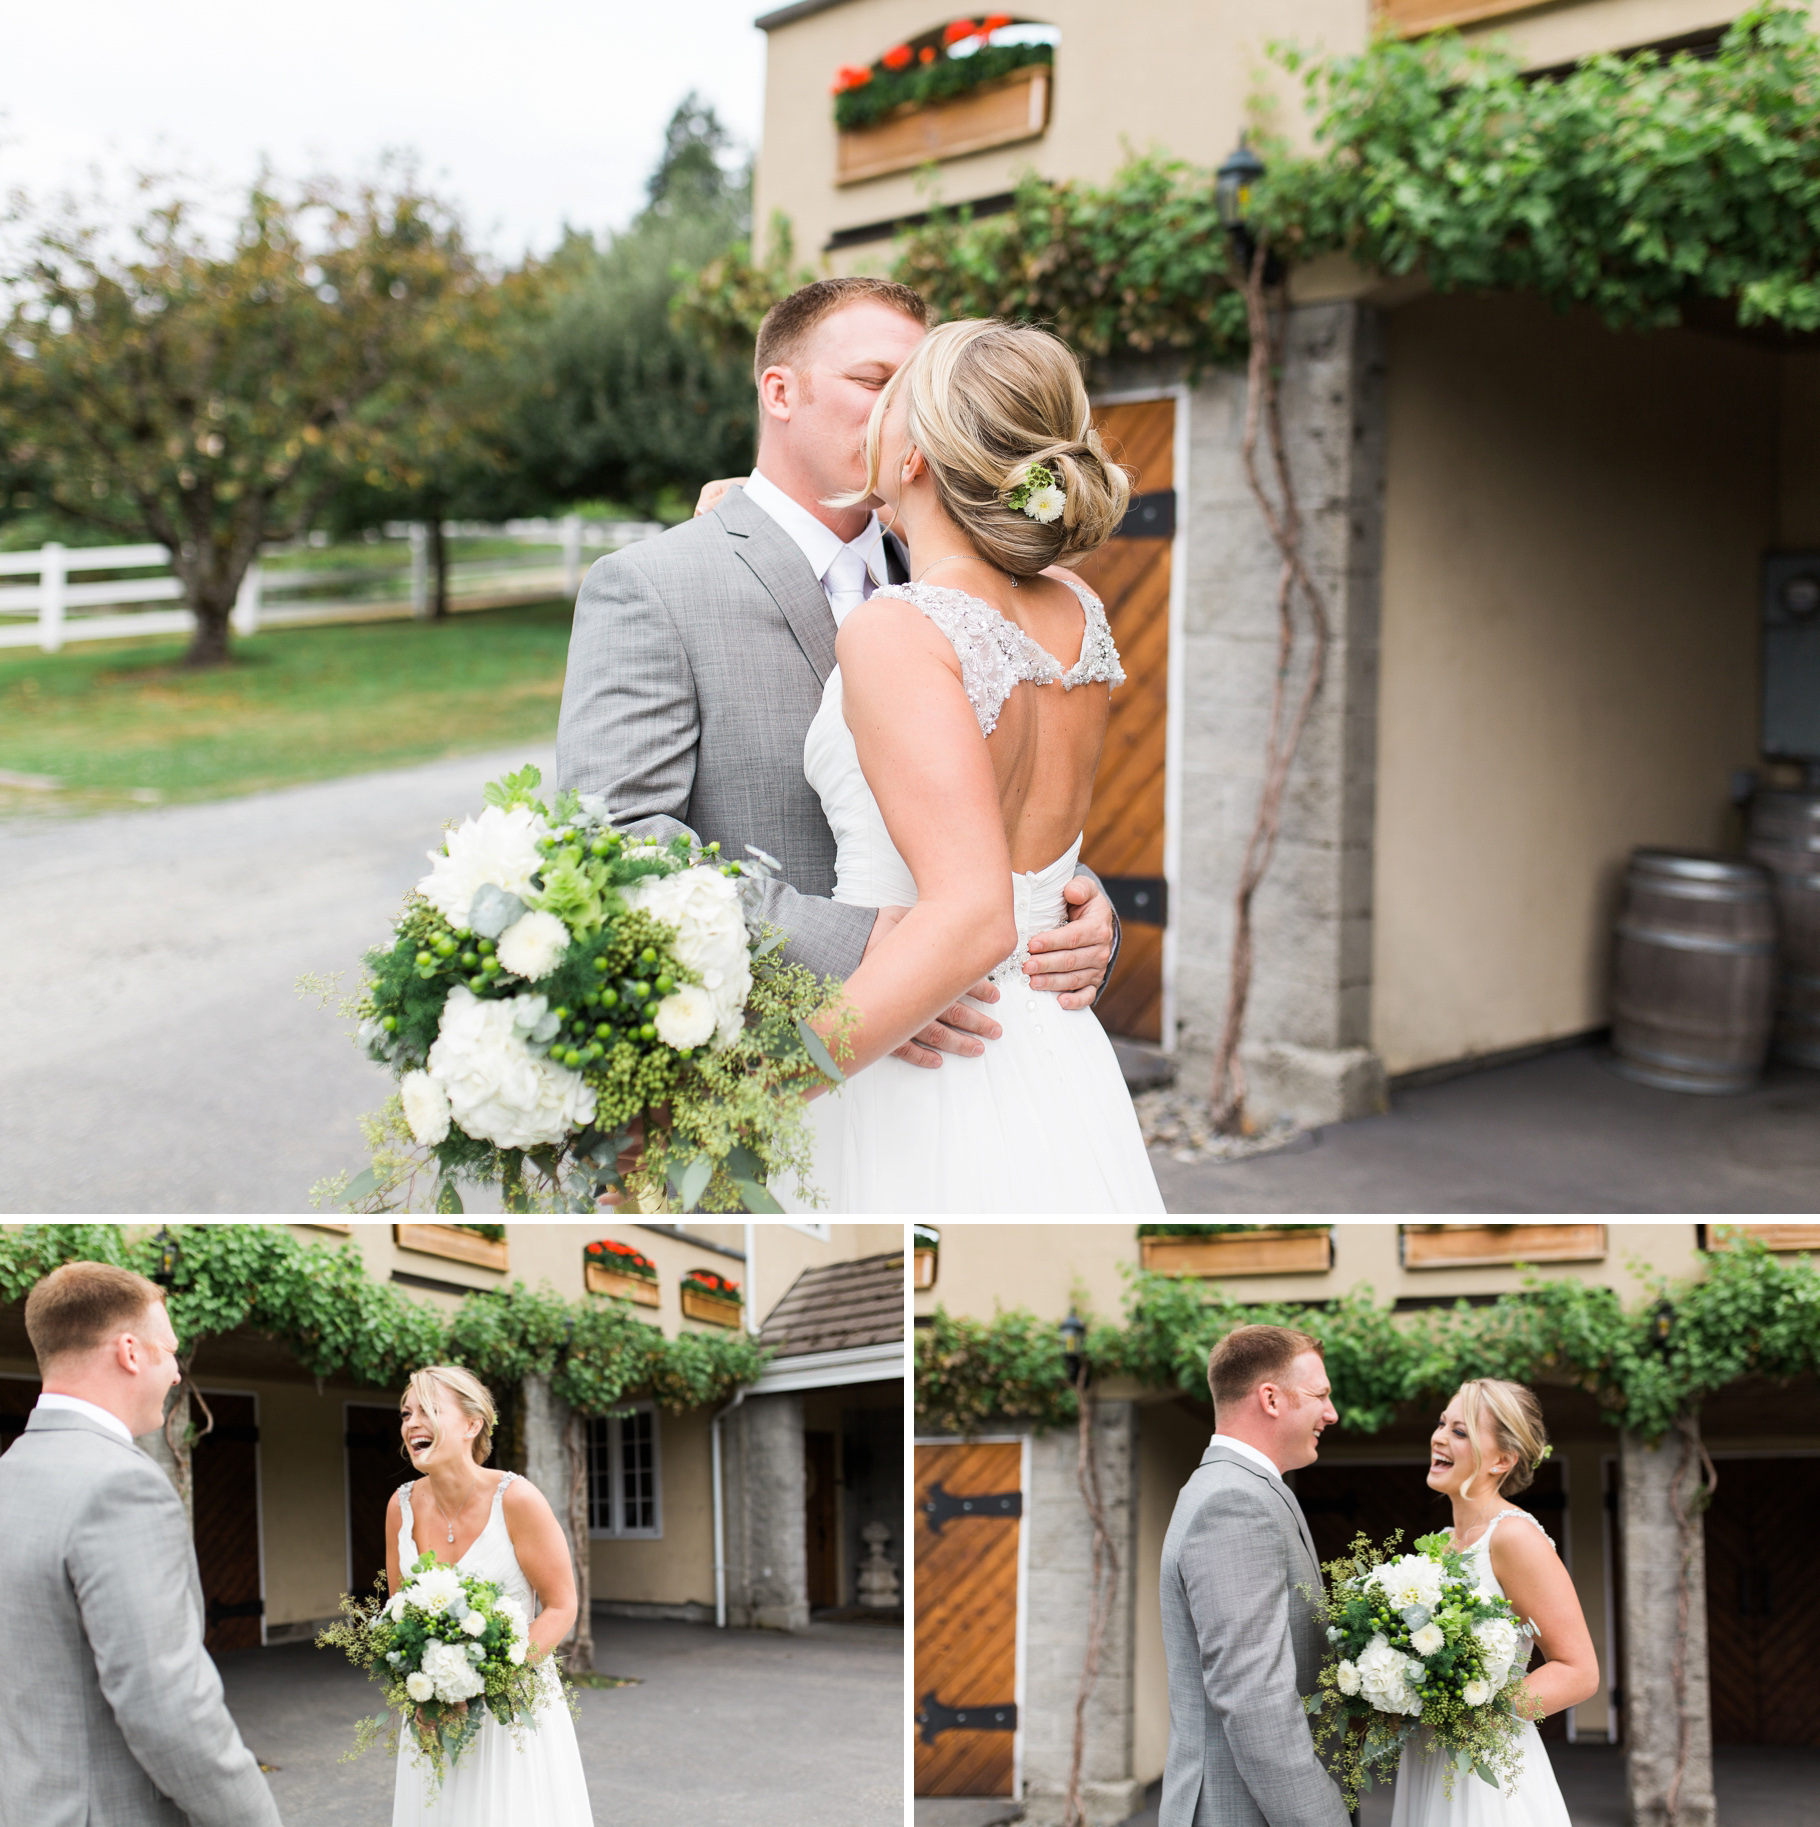 12-Delille-Cellars-Chateau-First-Look-Bride-Groom-Wedding-Photography-by-Betty-Elaine-Woodinville-Winery-Seattle-Photographer